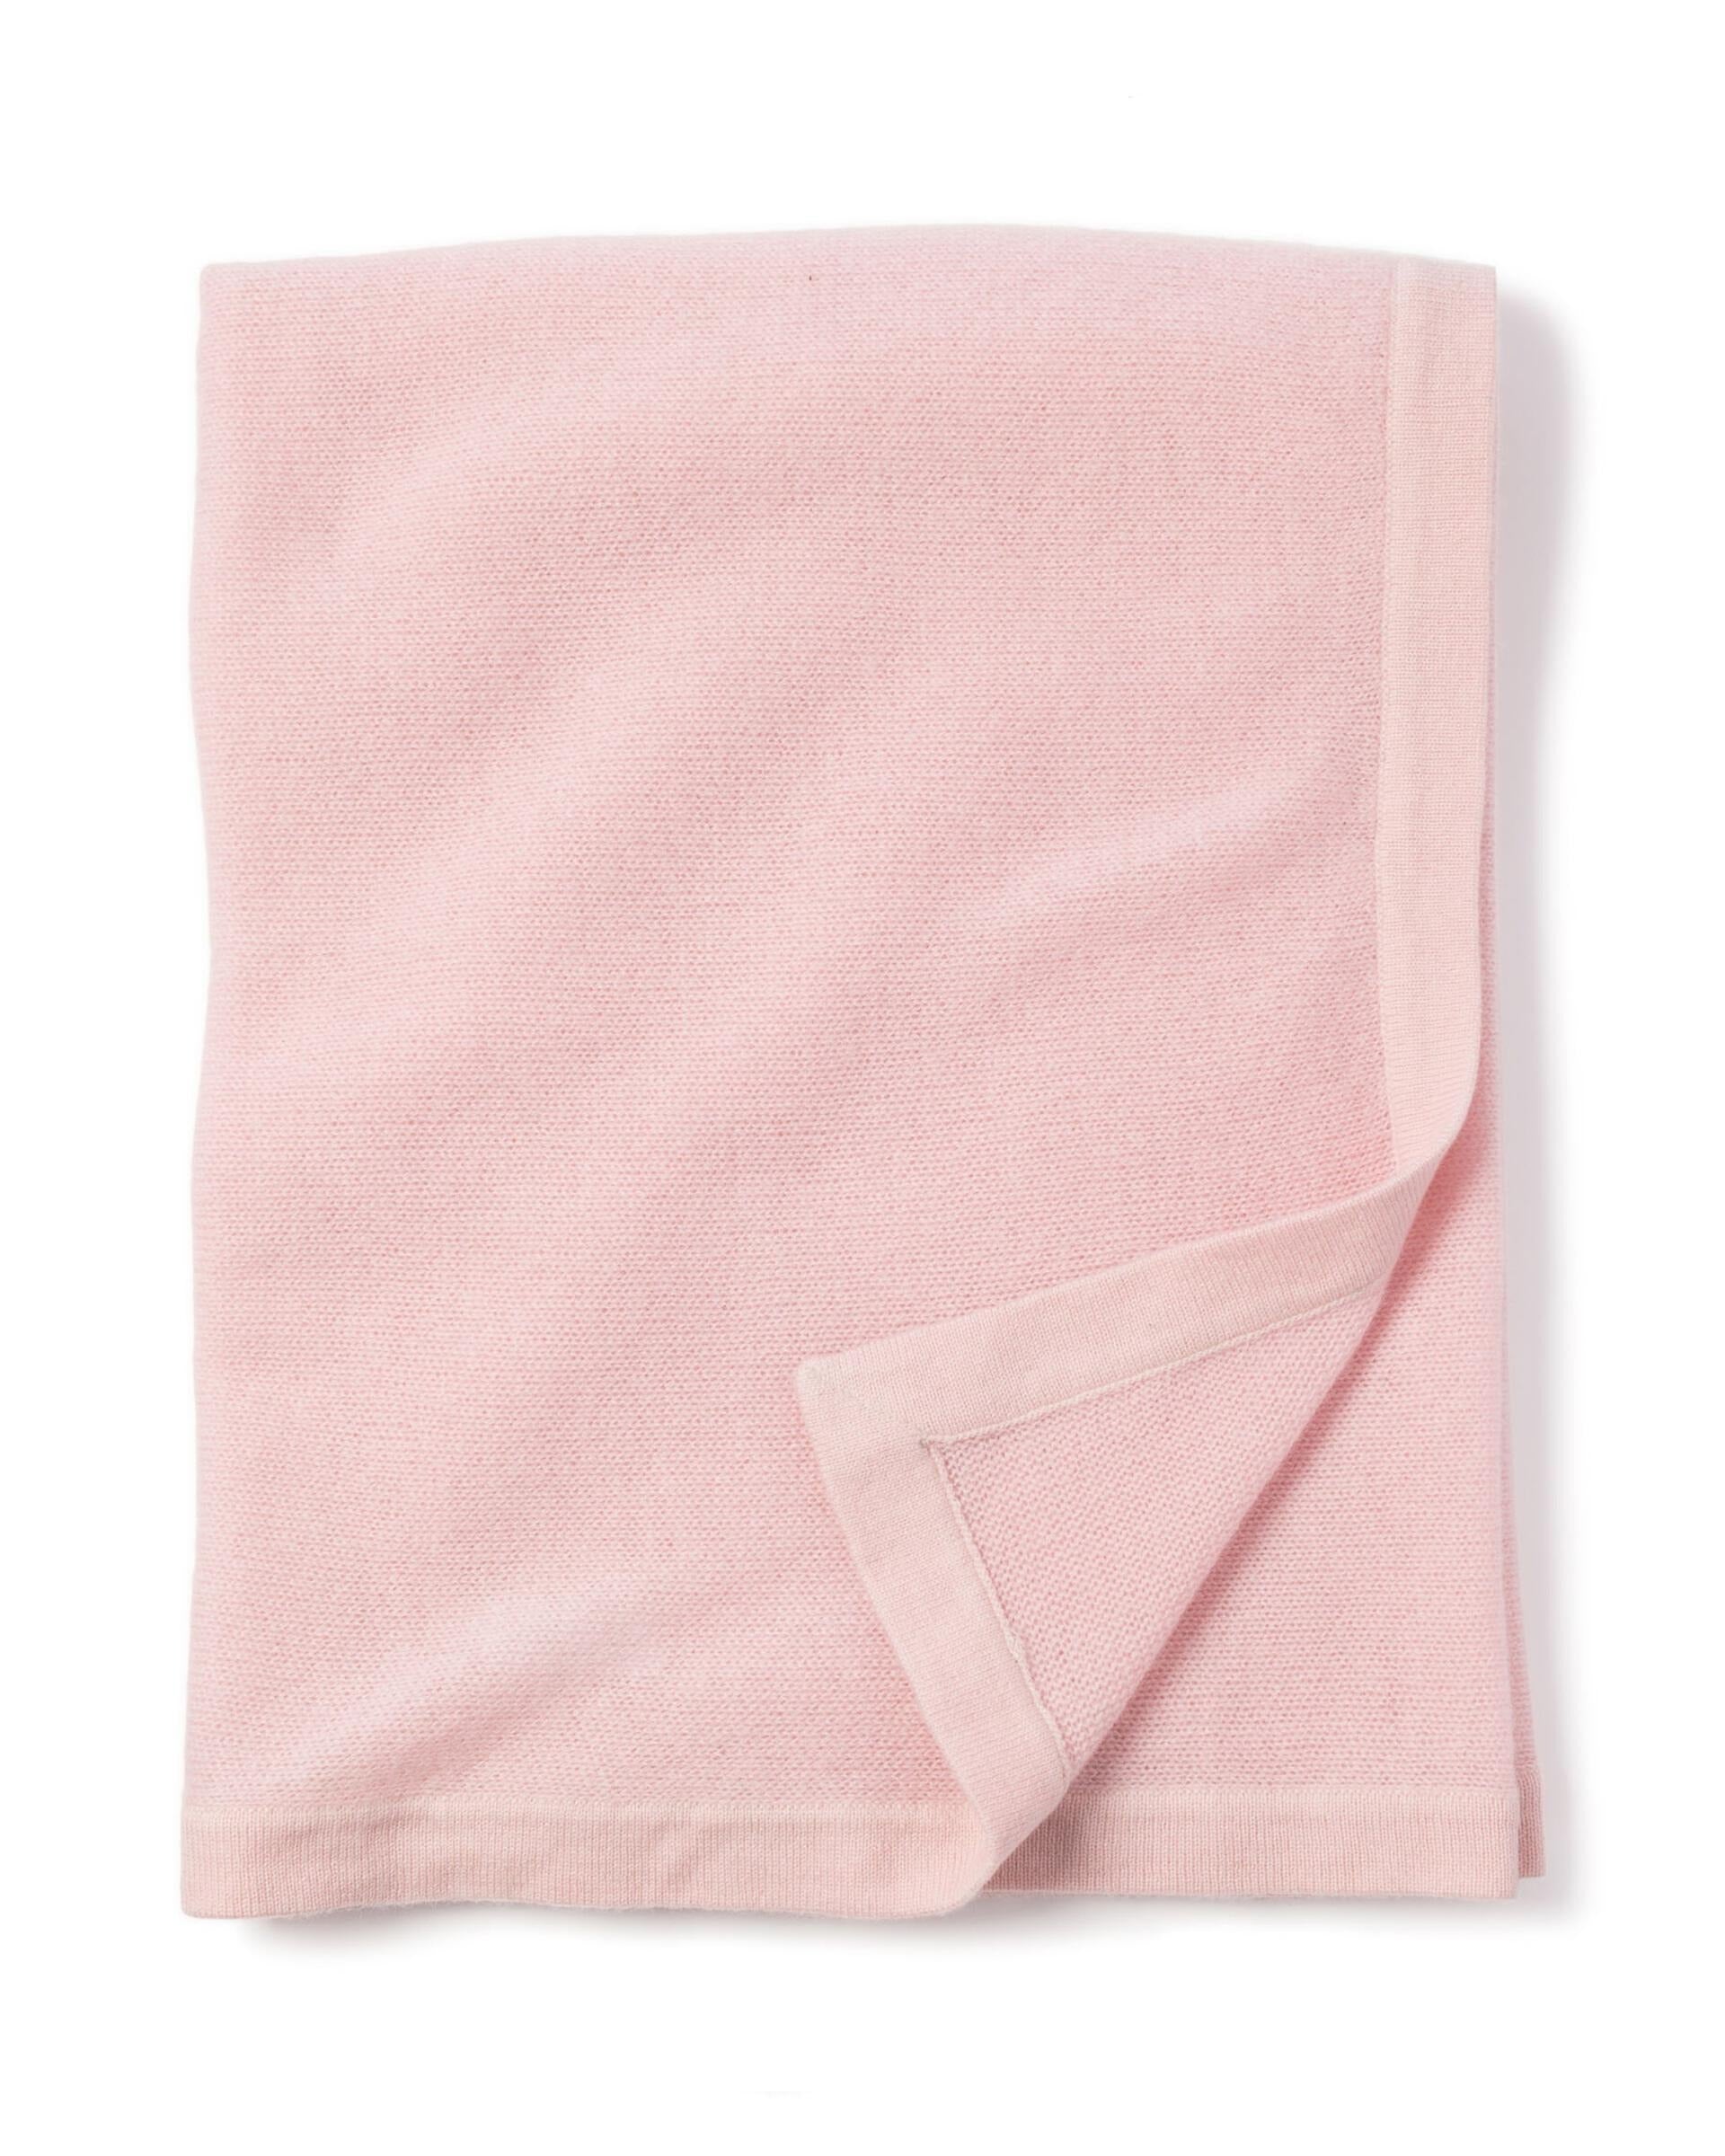 100% Cashmere Baby Blanket in Rose - Petite Plume